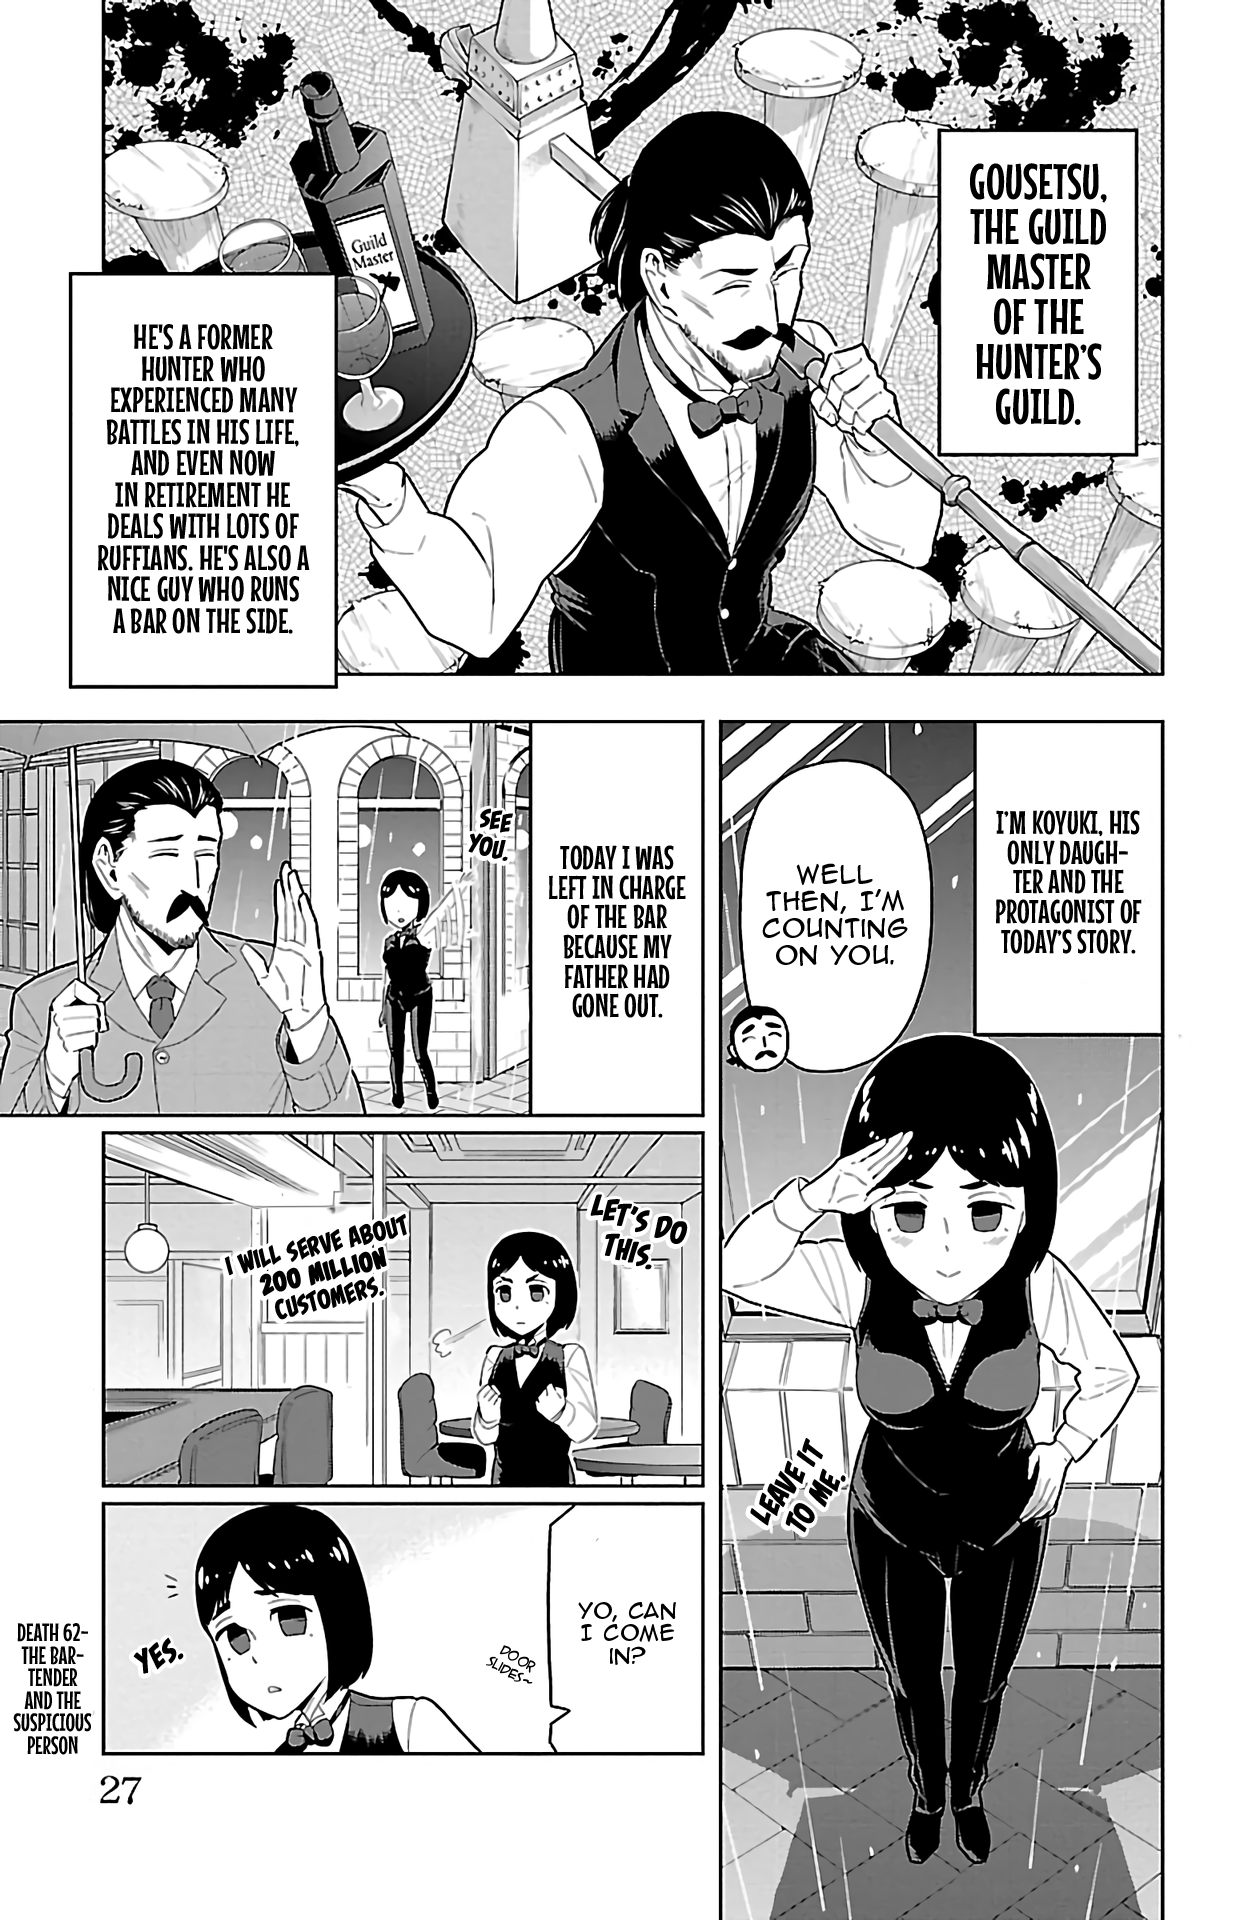 Kyuuketsuki Sugu Shinu Vol.6 Chapter 62: The Bartender And The Suspicious Person - Picture 1